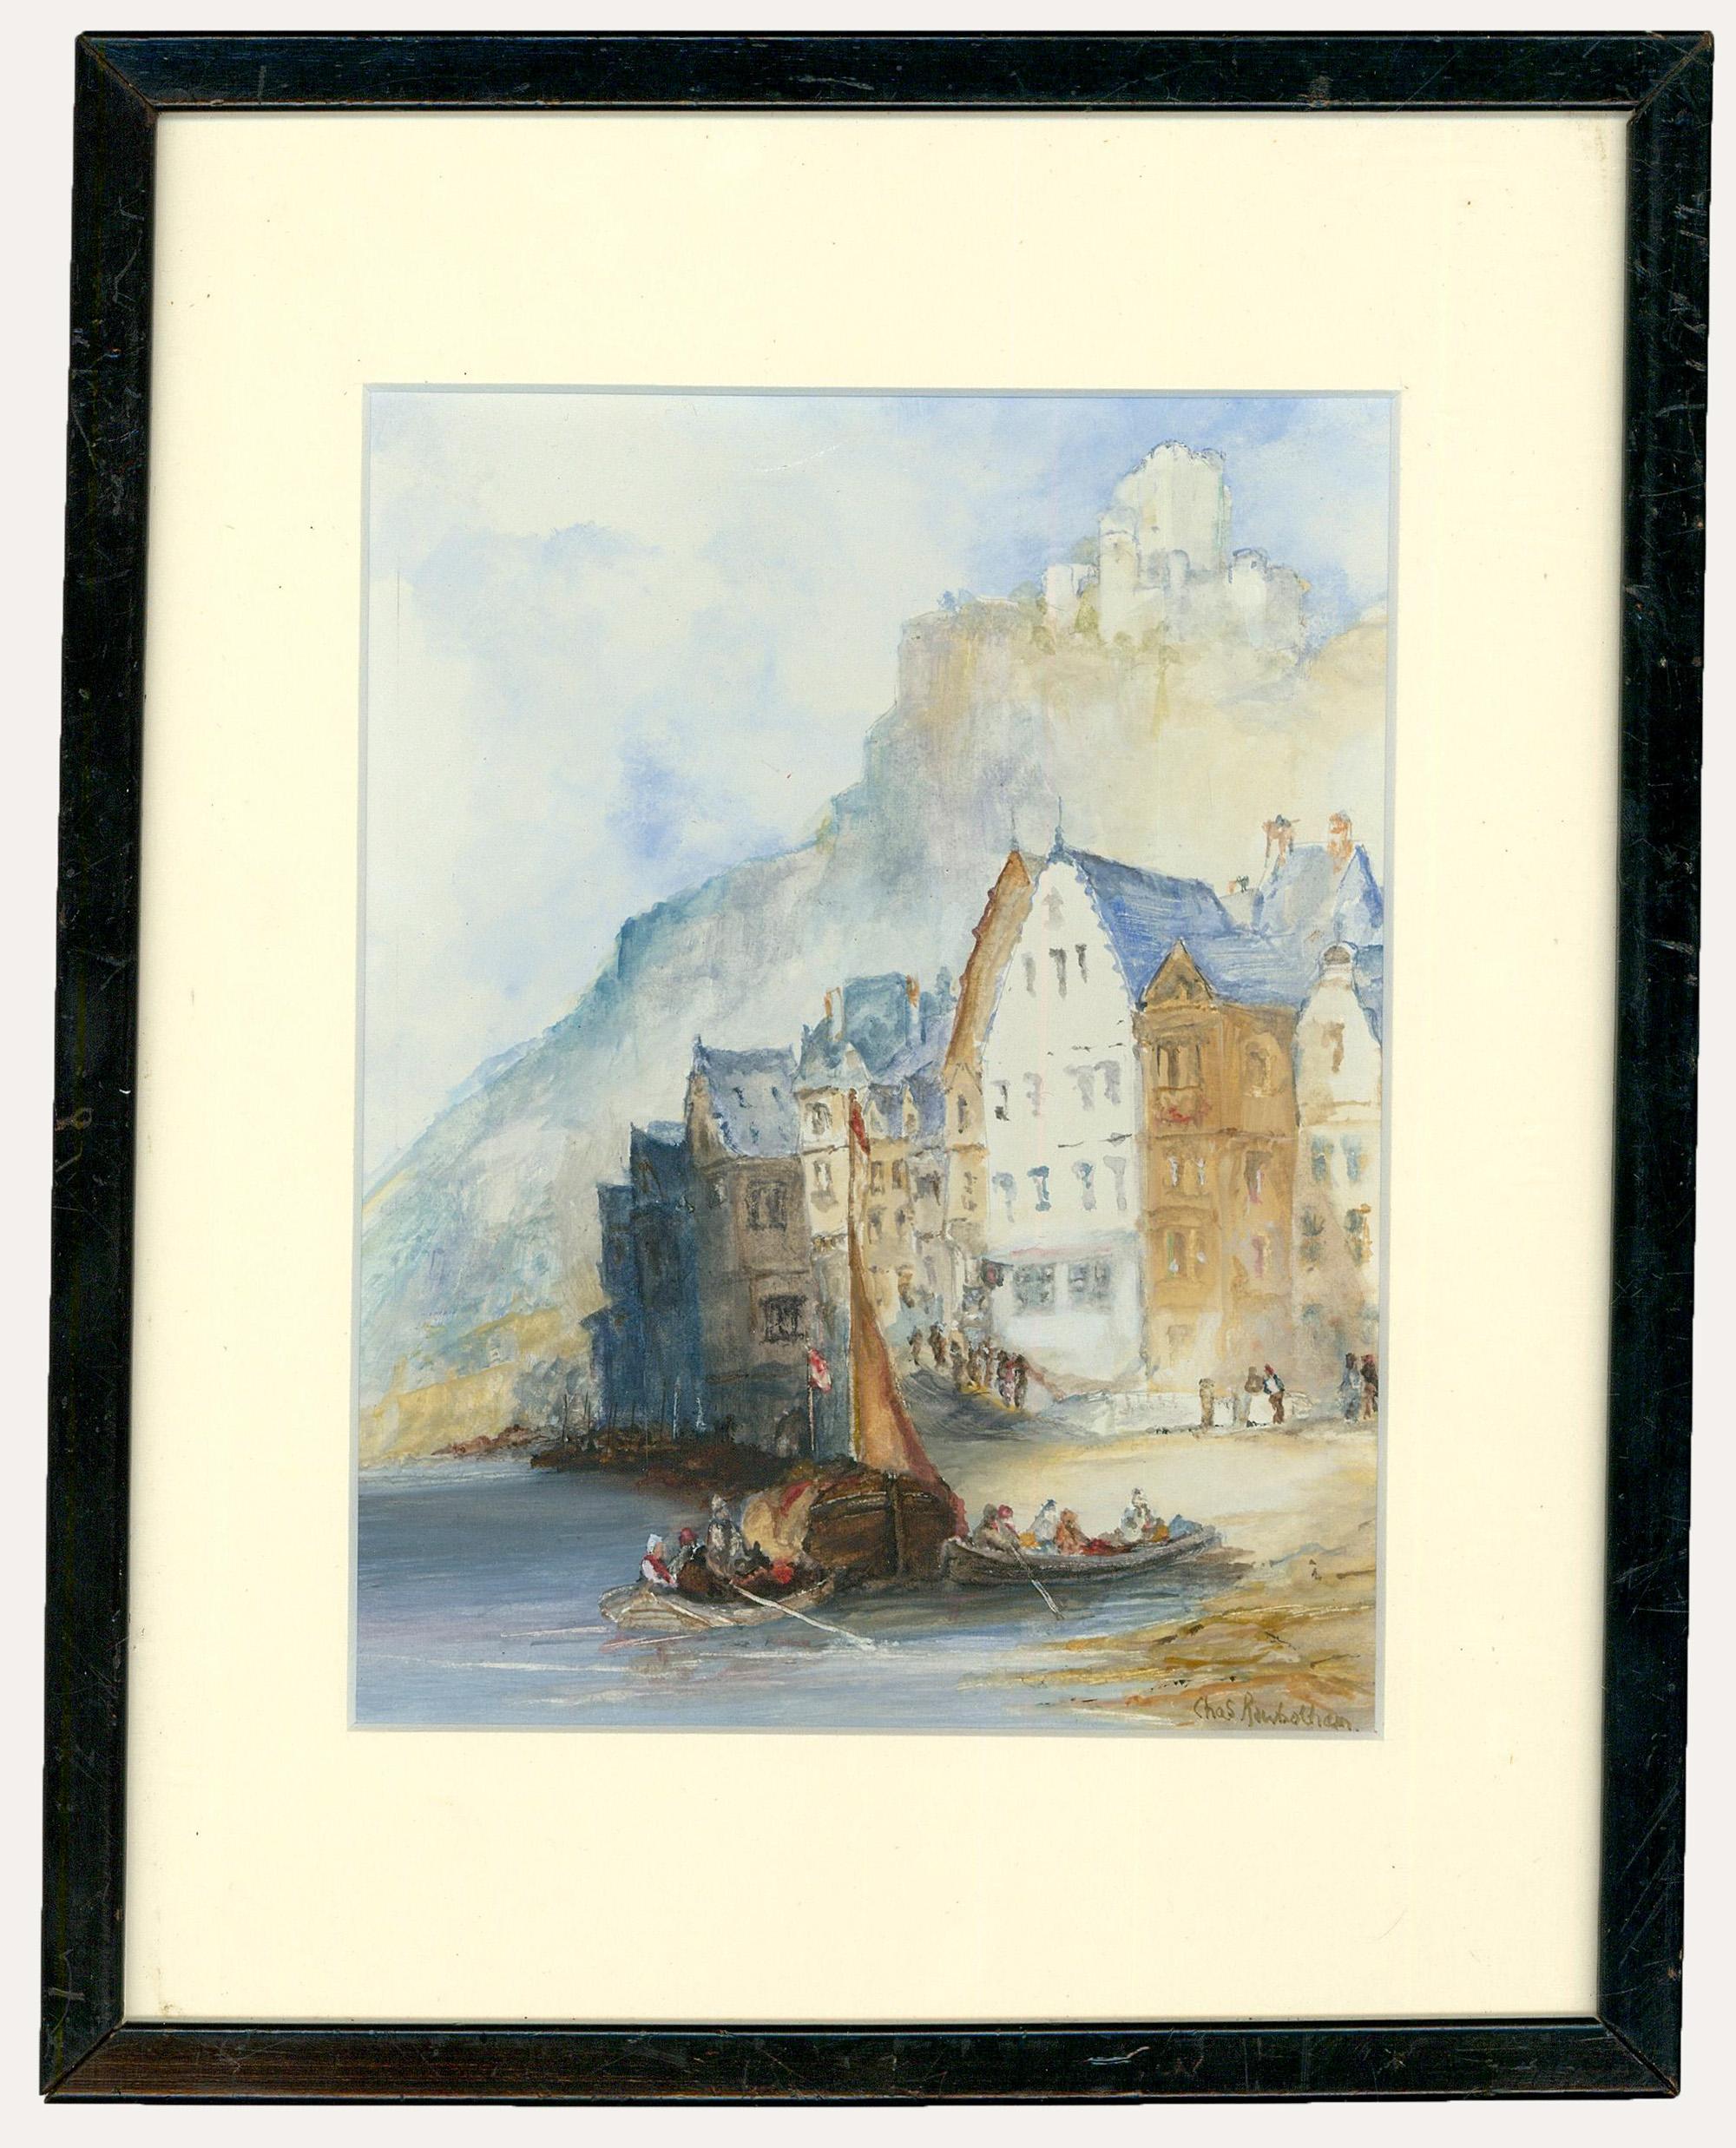 A charming watercolour scene by British artist Charles Rowbotham (1856-1921). Signed to the lower right. Presented in a narrow black frame with a crisp white mount. On paper.
